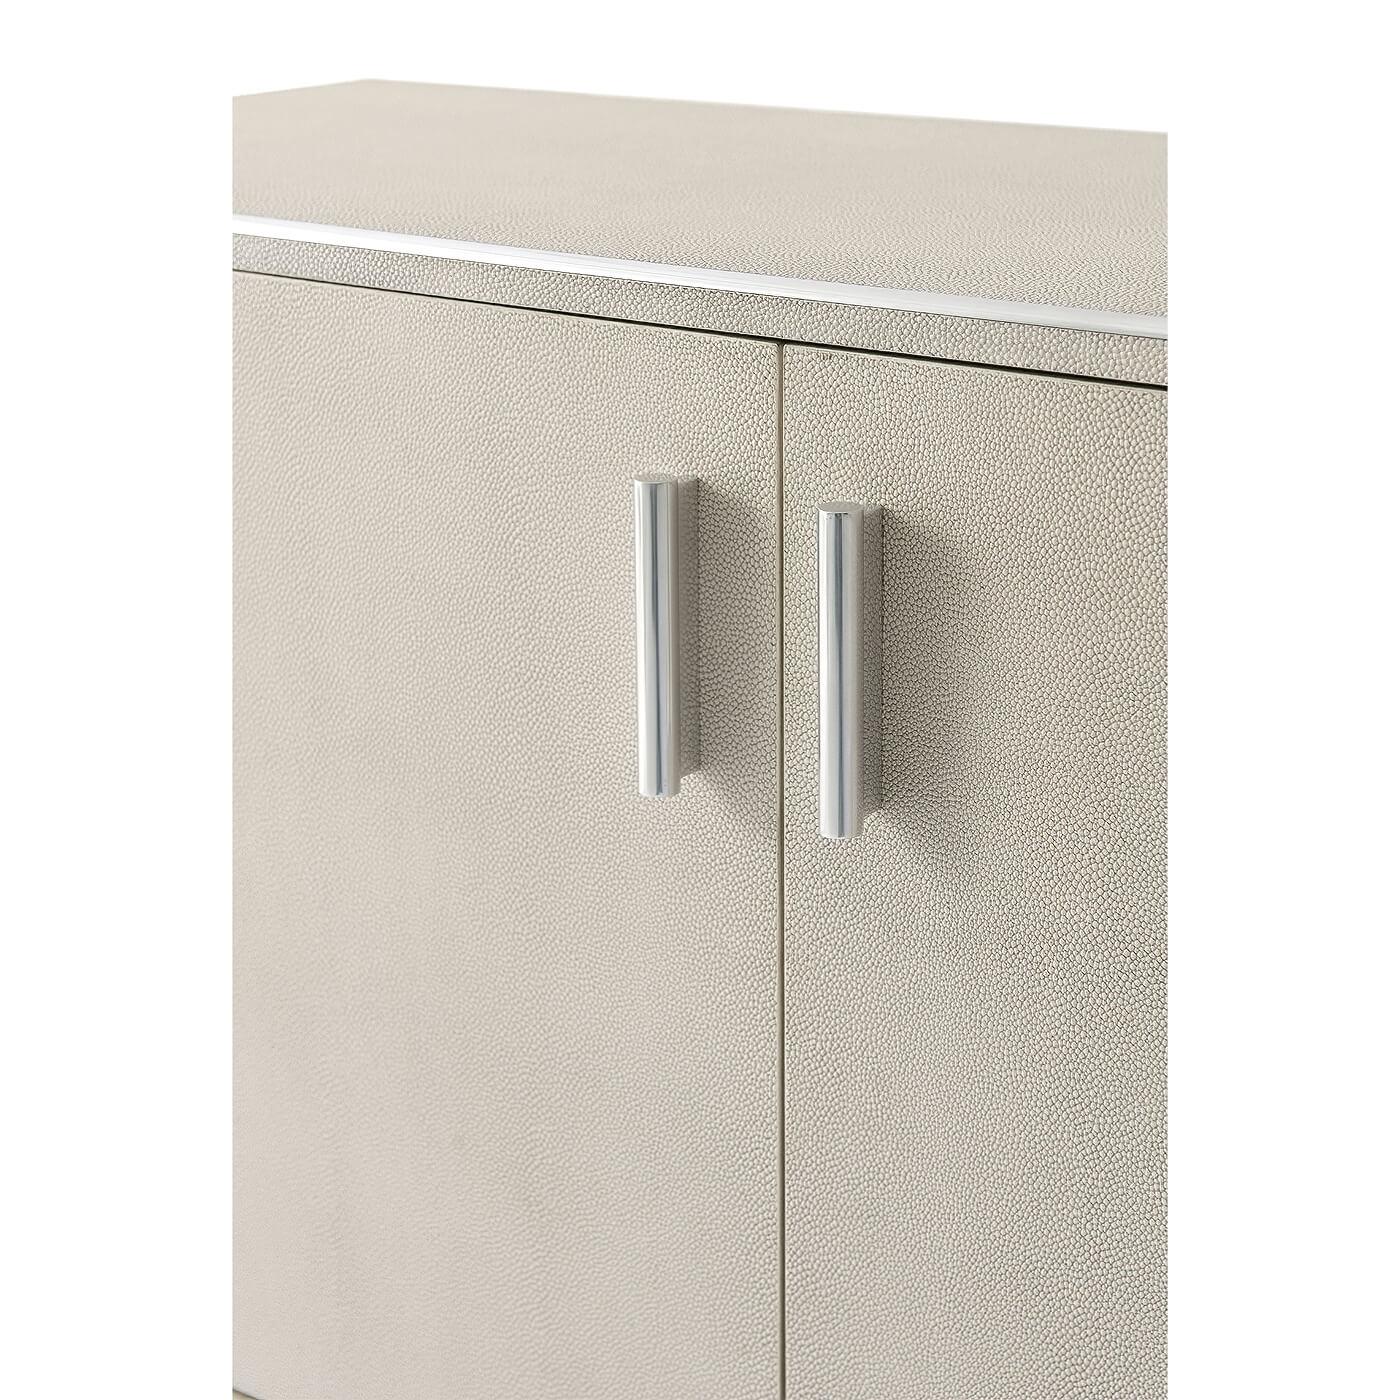 Contemporary Modern Leather Wrapped Media Cabinet, Light Overcast